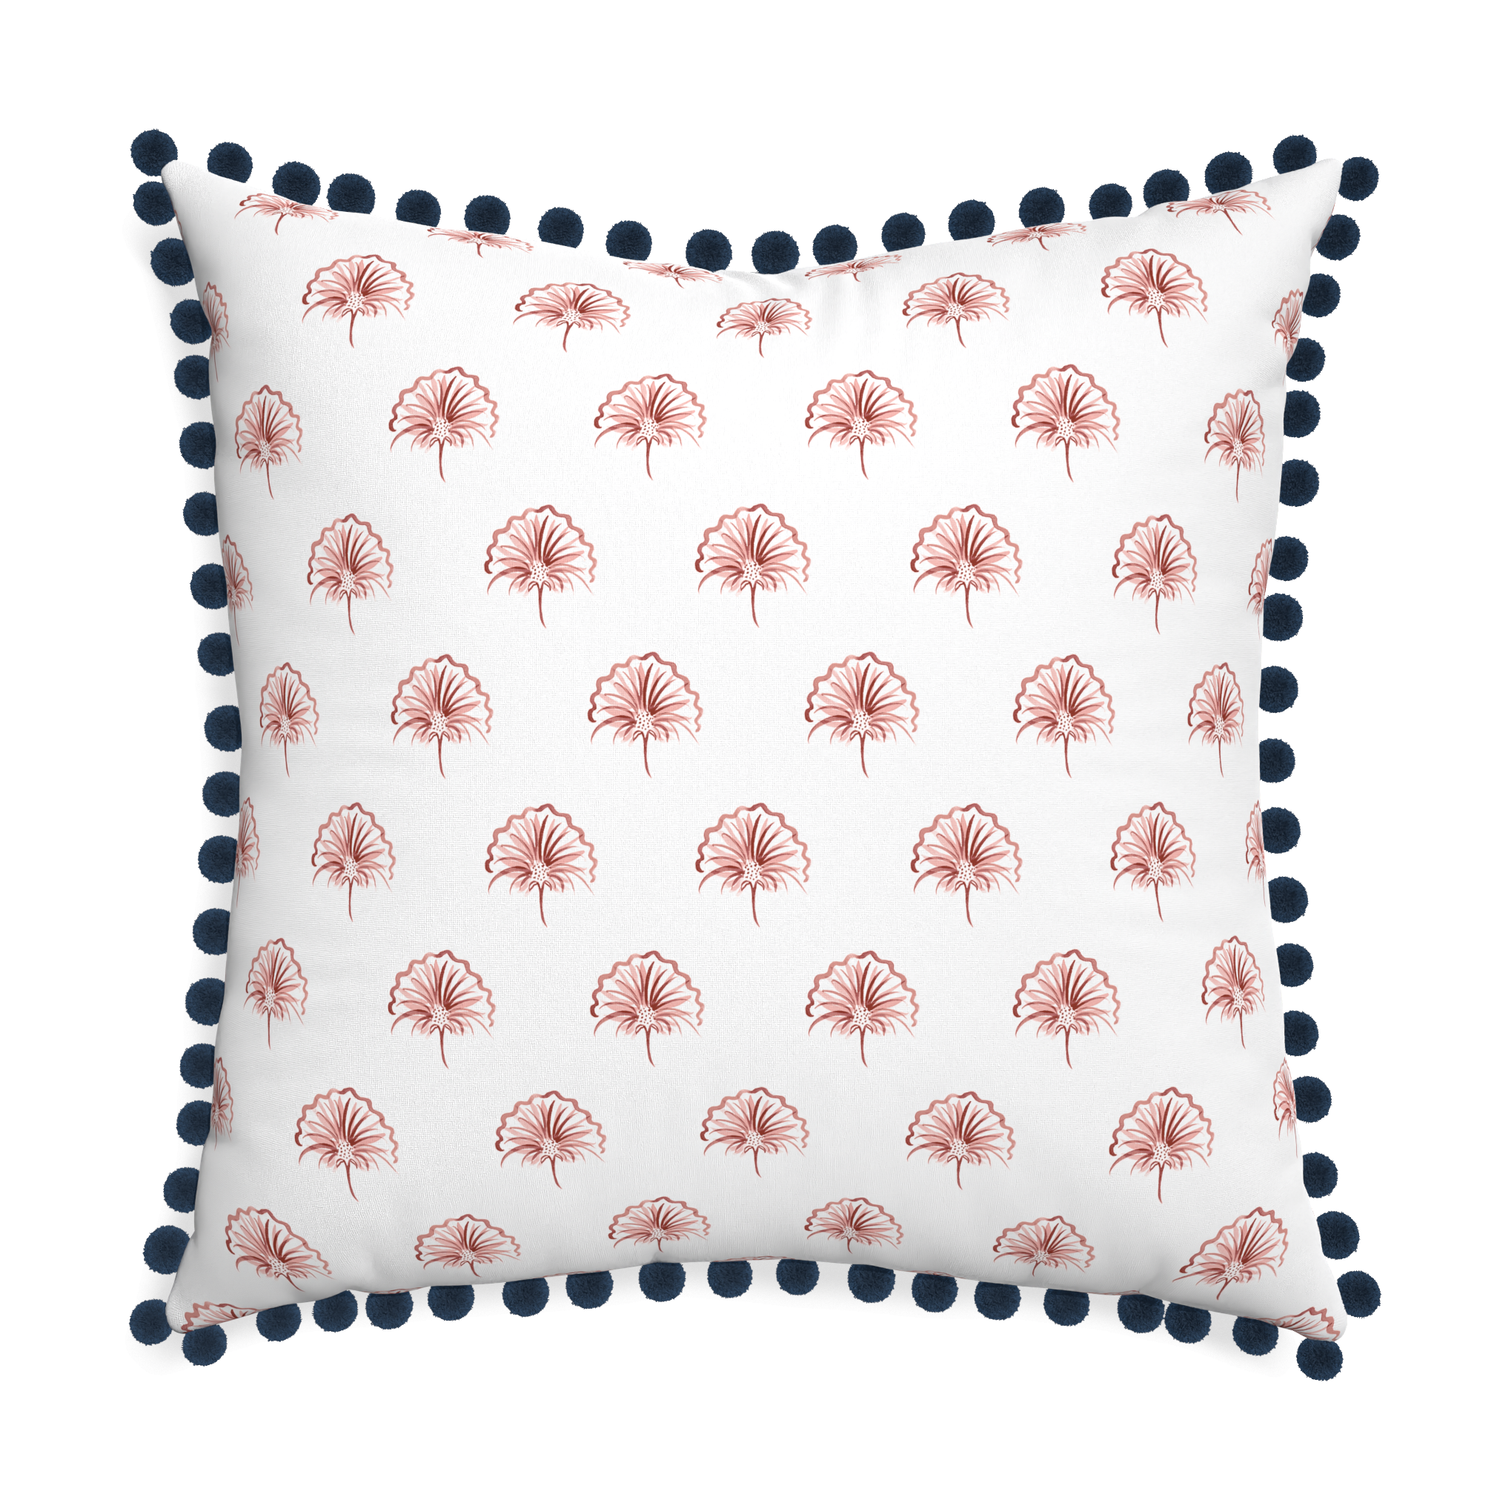 Euro-sham penelope rose custom floral pinkpillow with c on white background